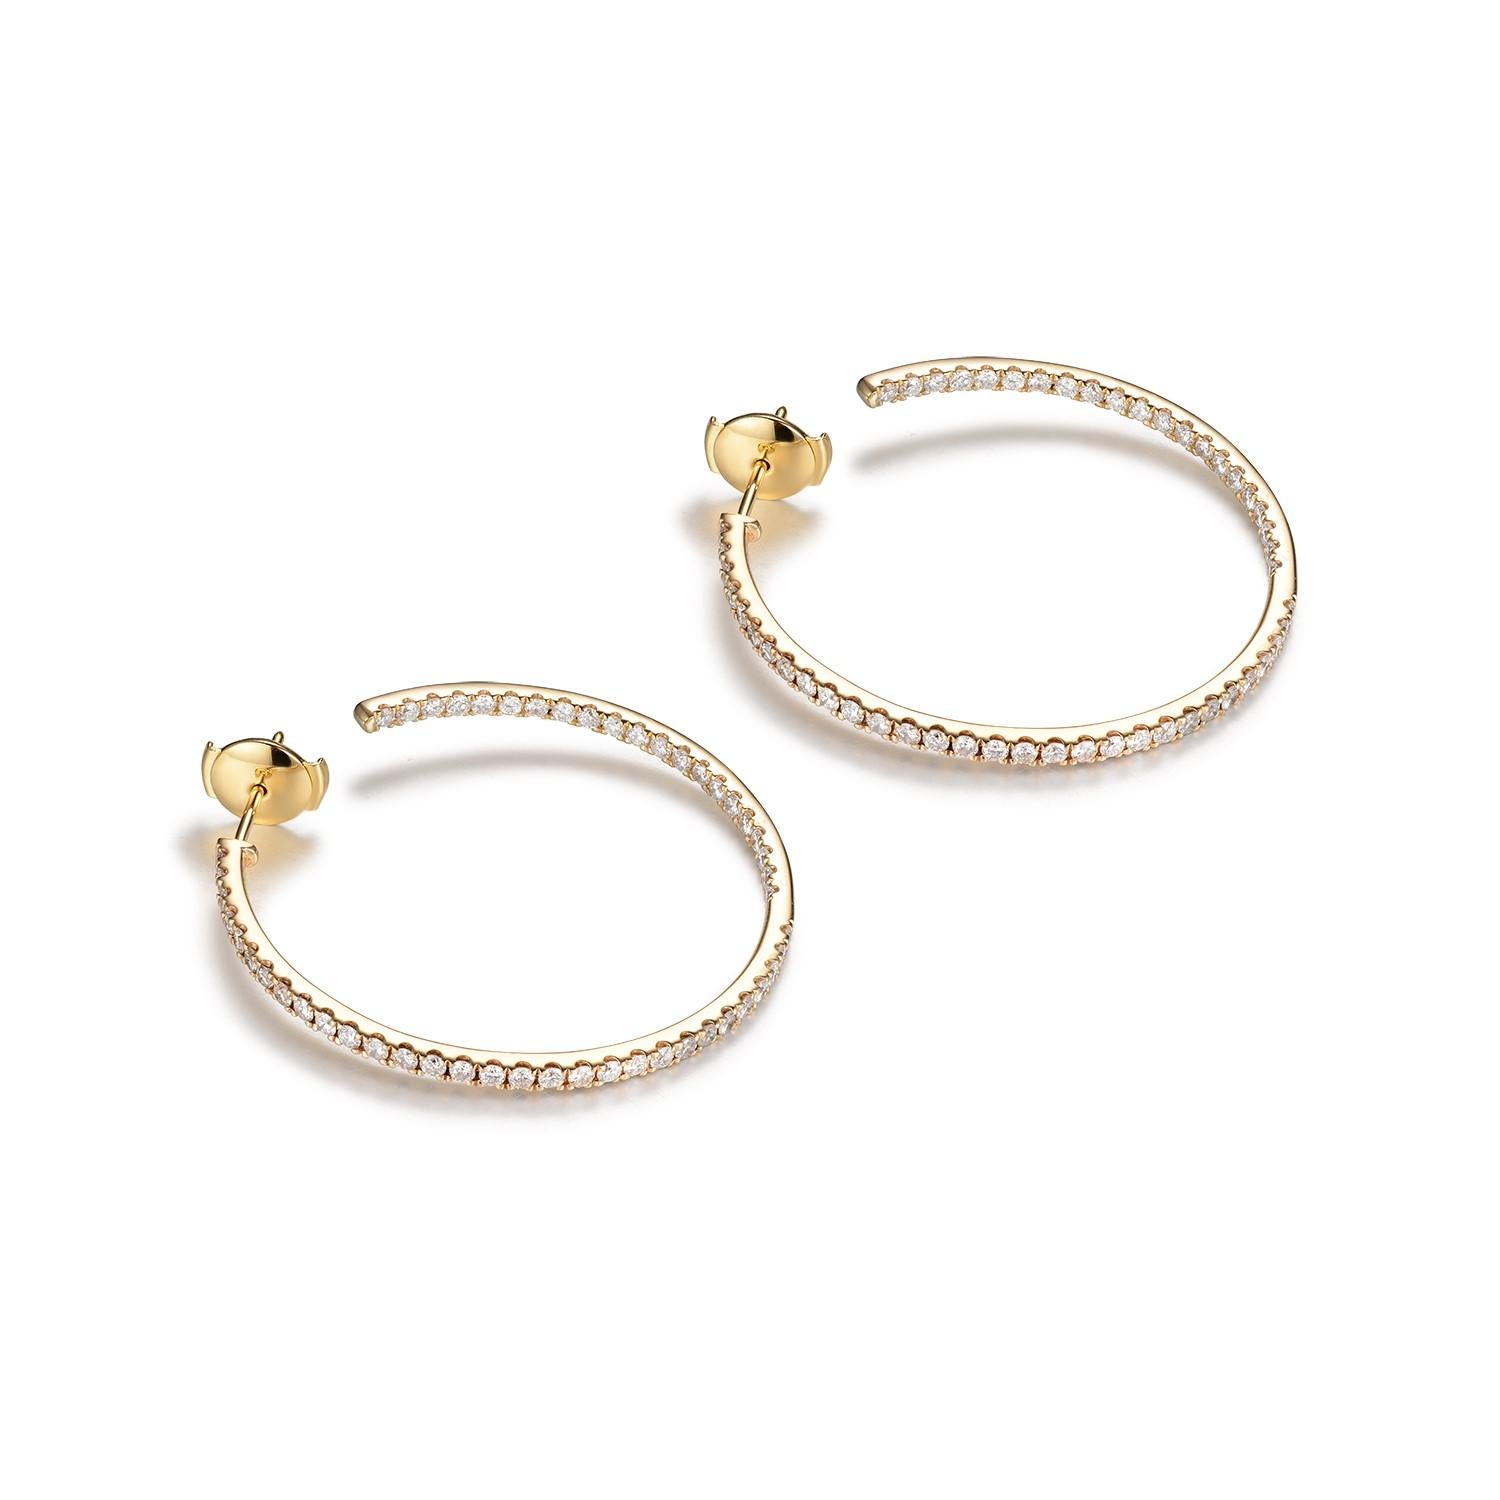 These elegant hoop earrings are crafted from 14K yellow gold, offering a classic and warm aesthetic. Each earring is embellished with a generous array of diamonds, totaling 2.09 carats, that encircle the hoop in a continuous loop of radiance.

The